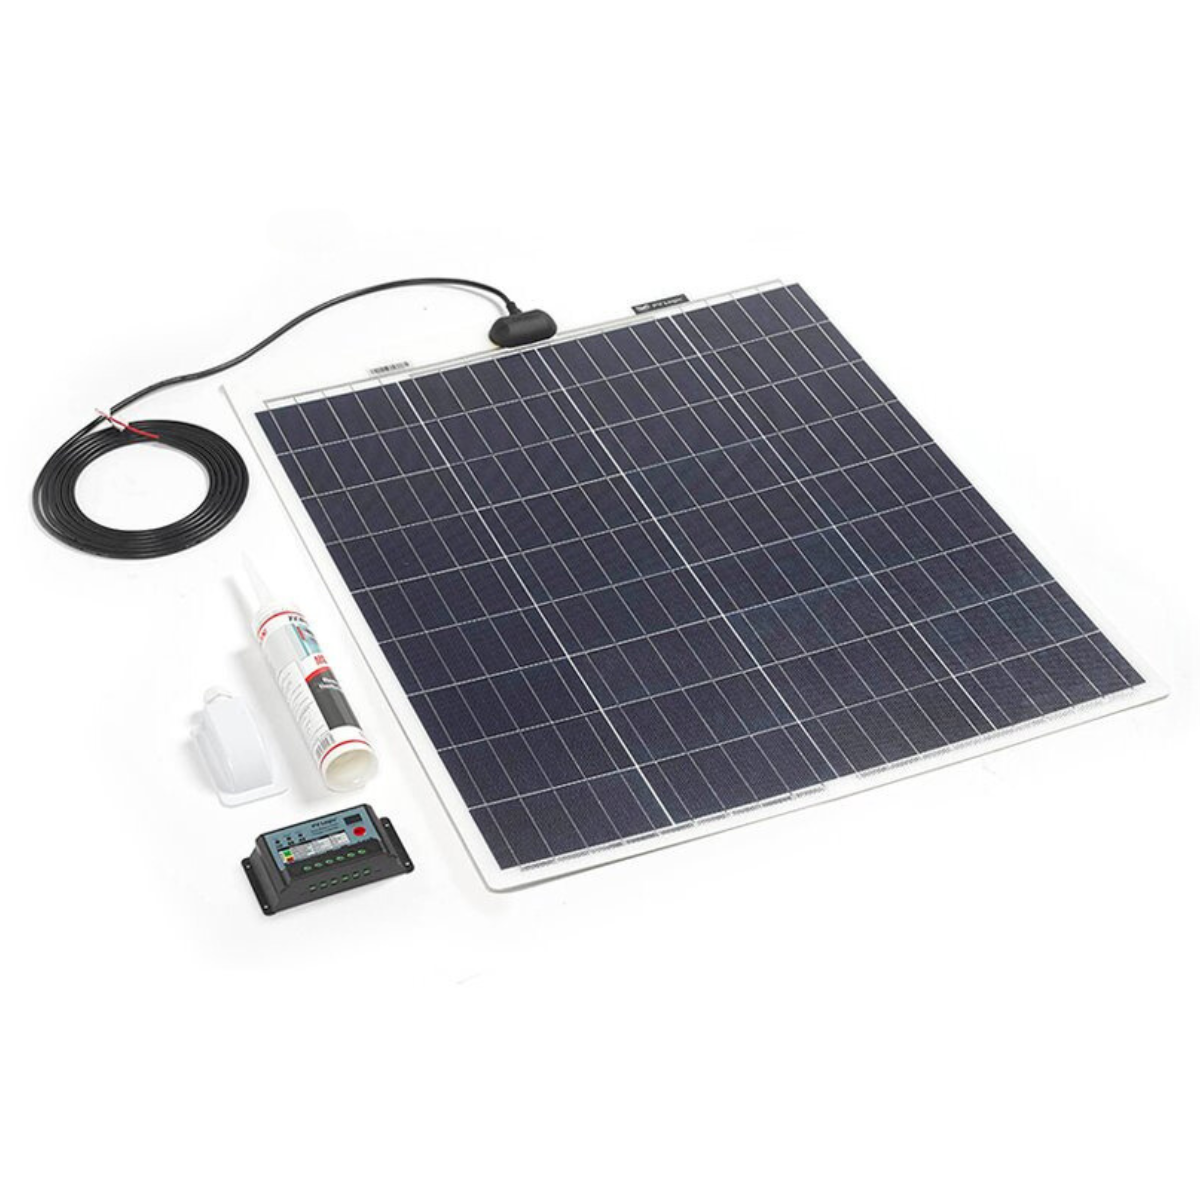 The Premium rigid solar panel comes with everything you need to connect to your engine's starter motor making it the best insurance policy you'll buy this year.